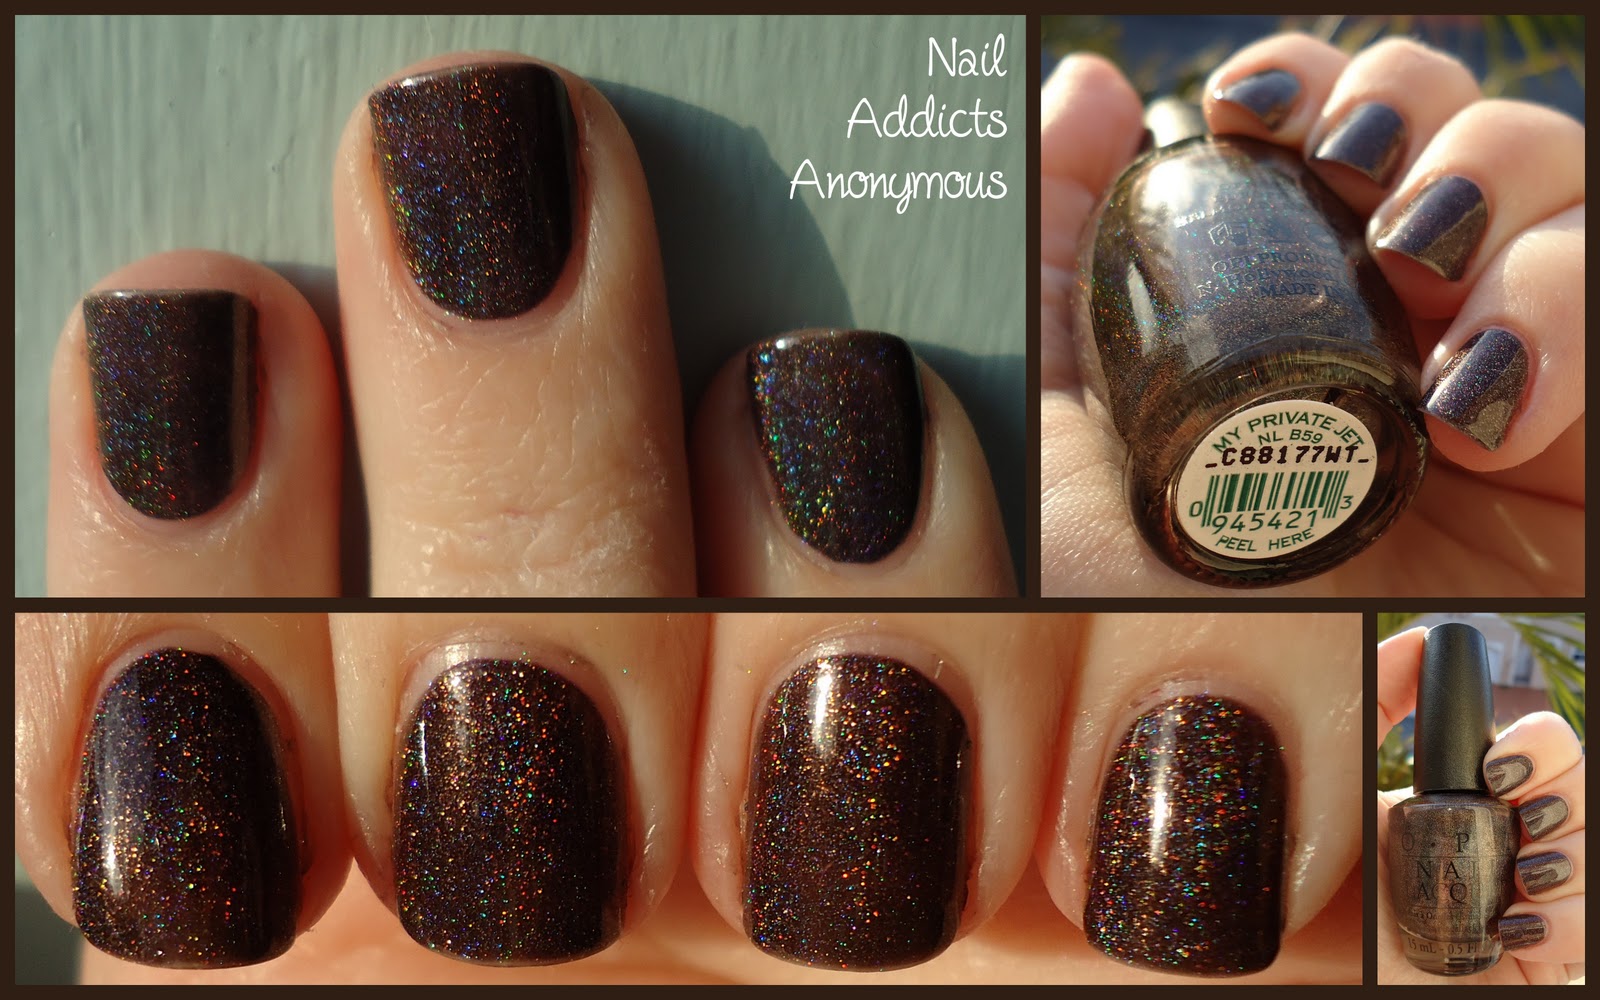 3. OPI Nail Lacquer in "My Private Jet" - wide 4